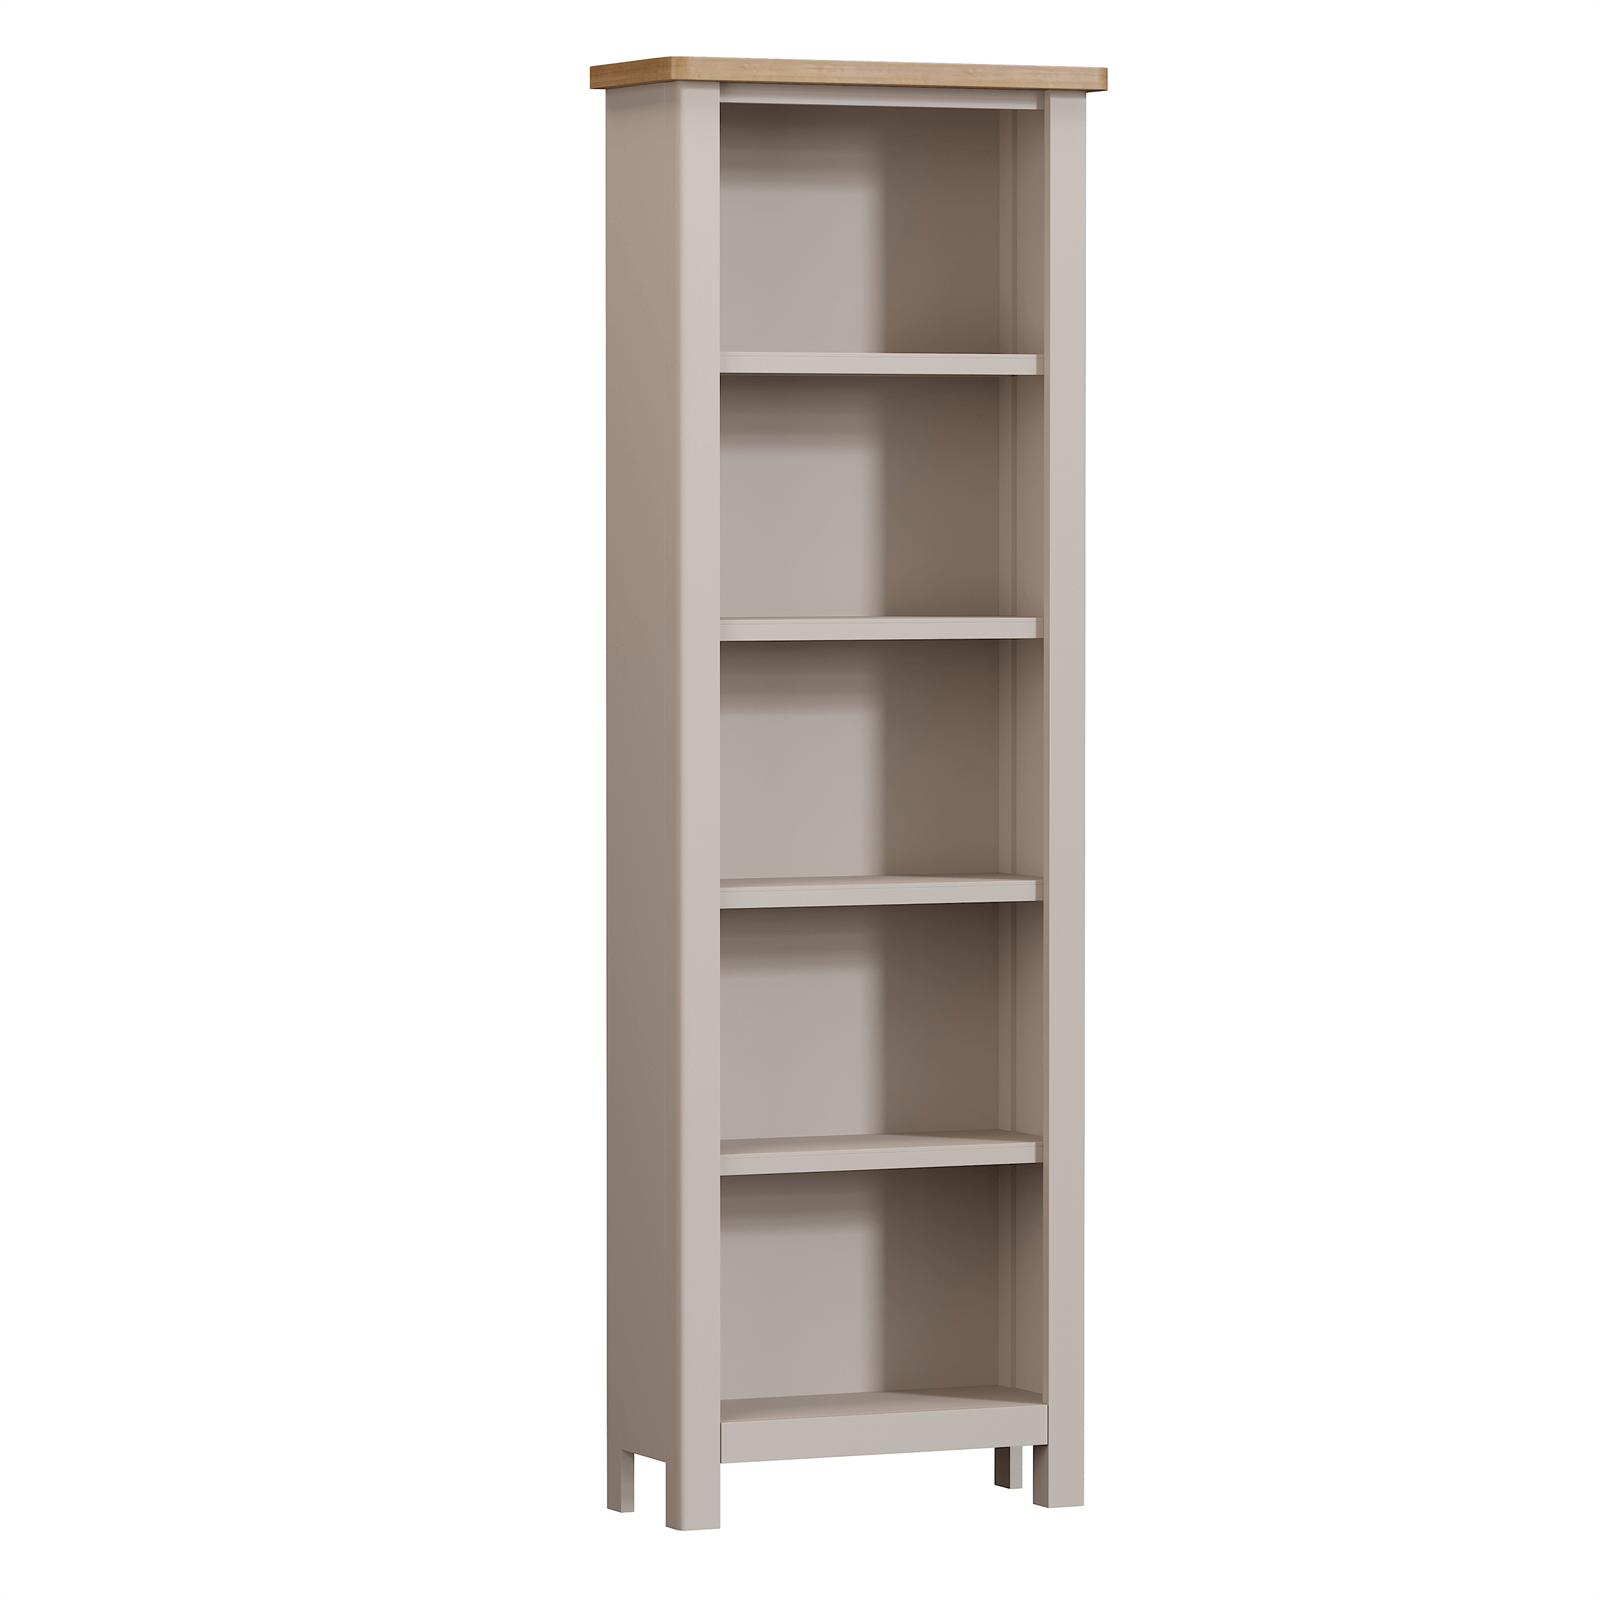 Padstow Large Bookcase - Truffle